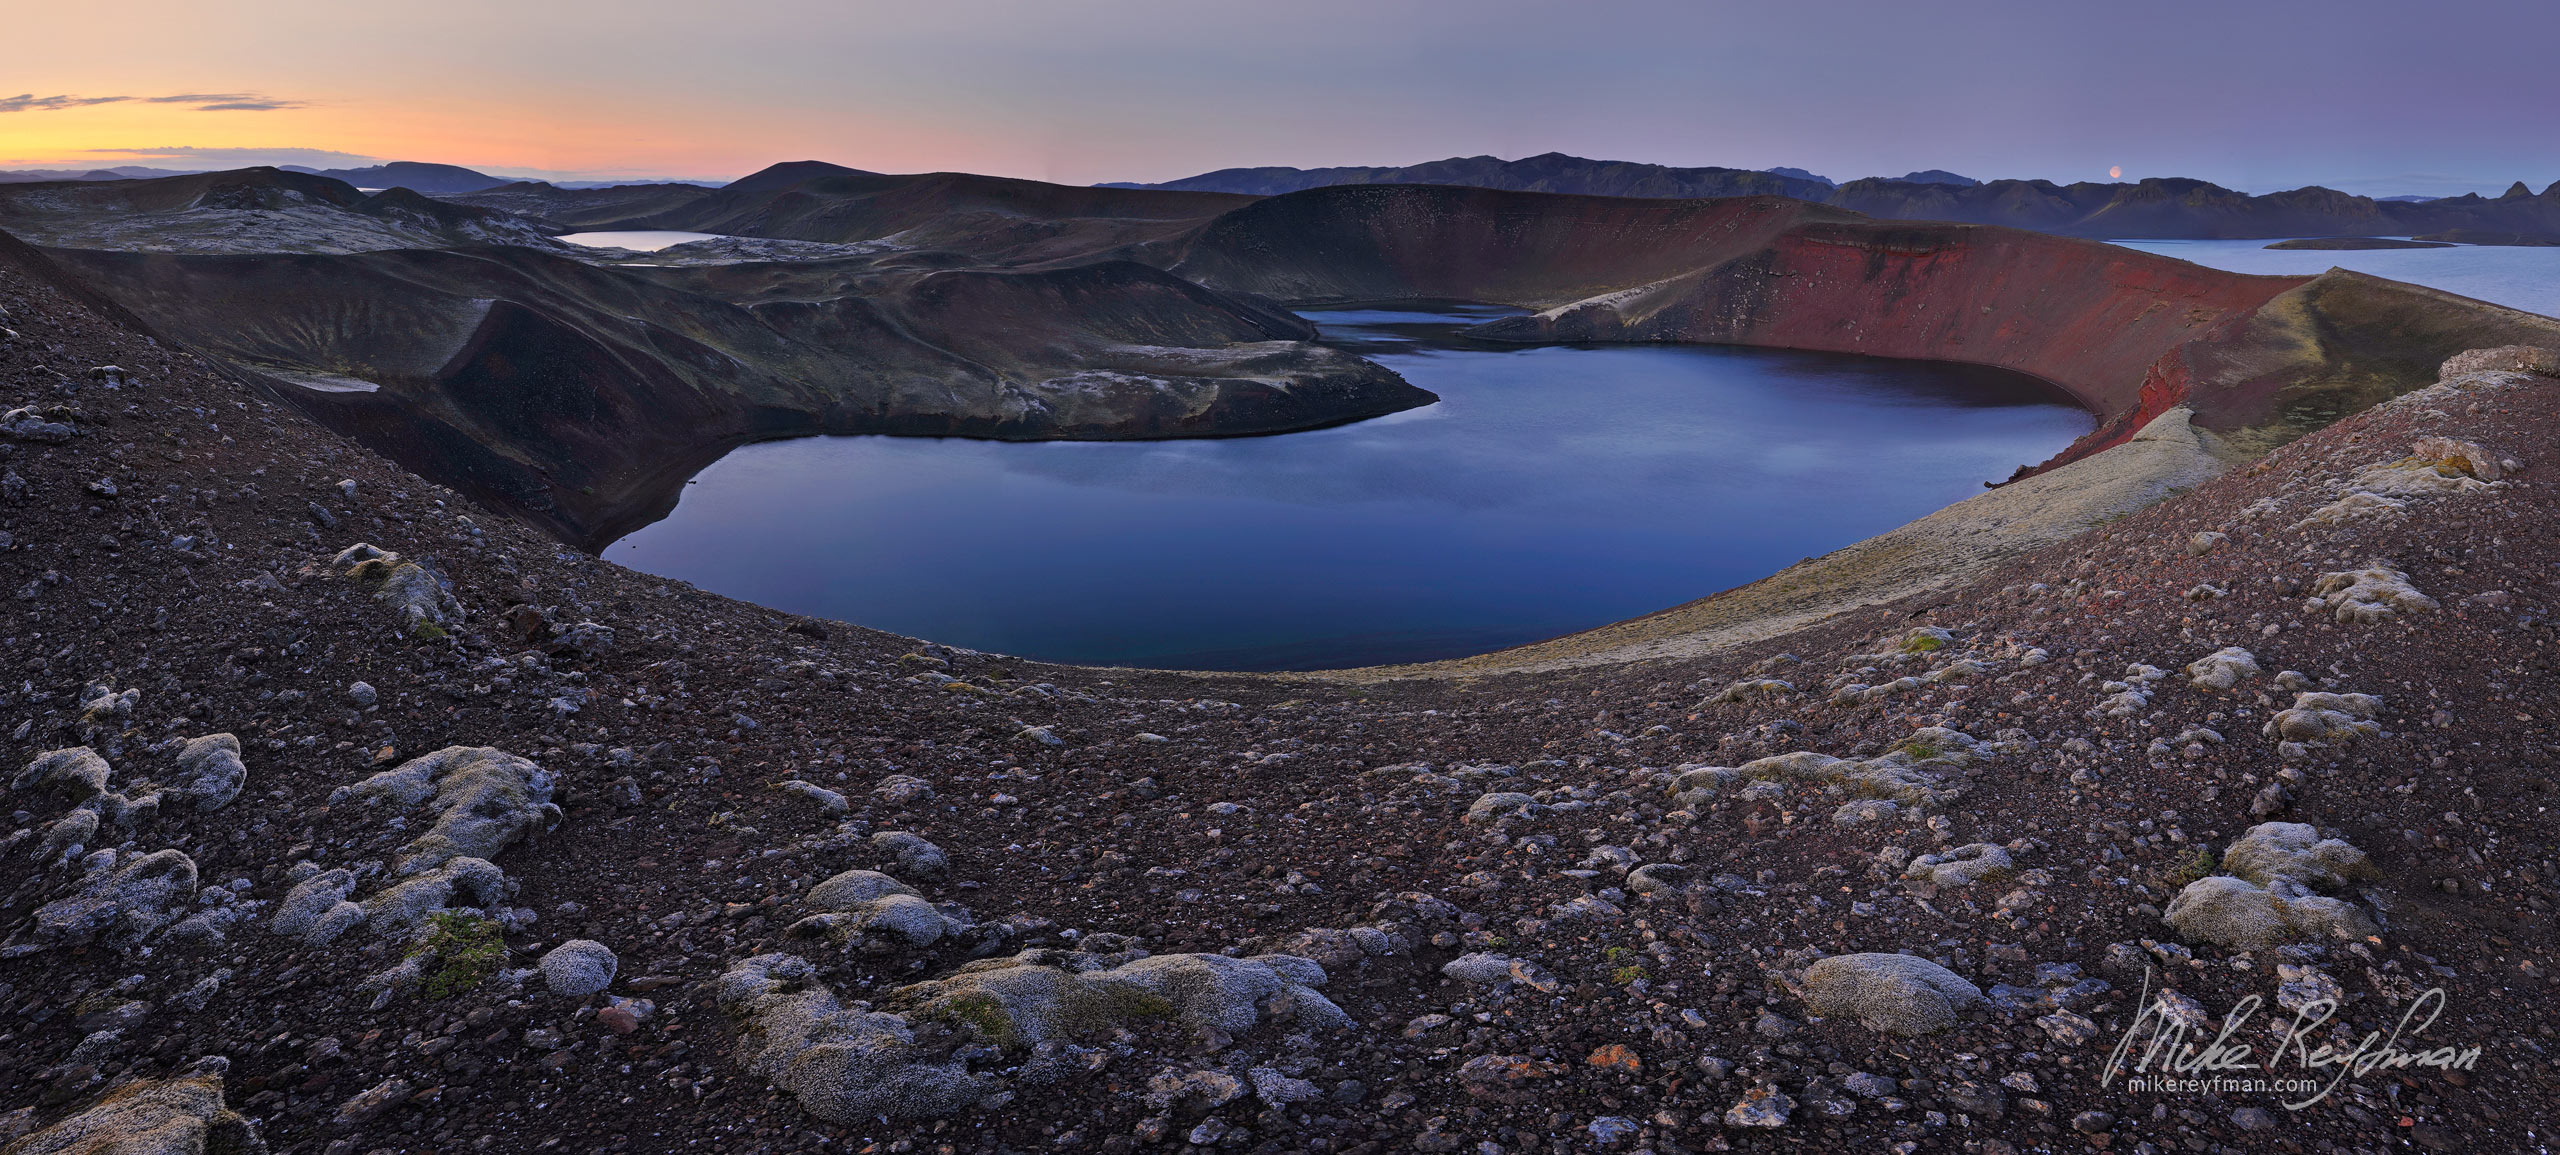 Crater lakes in the Veidivotn area. Central Highlands, Iceland. 066-IC-GP _M3X4855-60_Pano-1x2 - Rhyolite Mountains, Crater Lakes, Geothermal Areas, Lava Fields and Glacial Rivers. Iceland.  - Mike Reyfman Photography